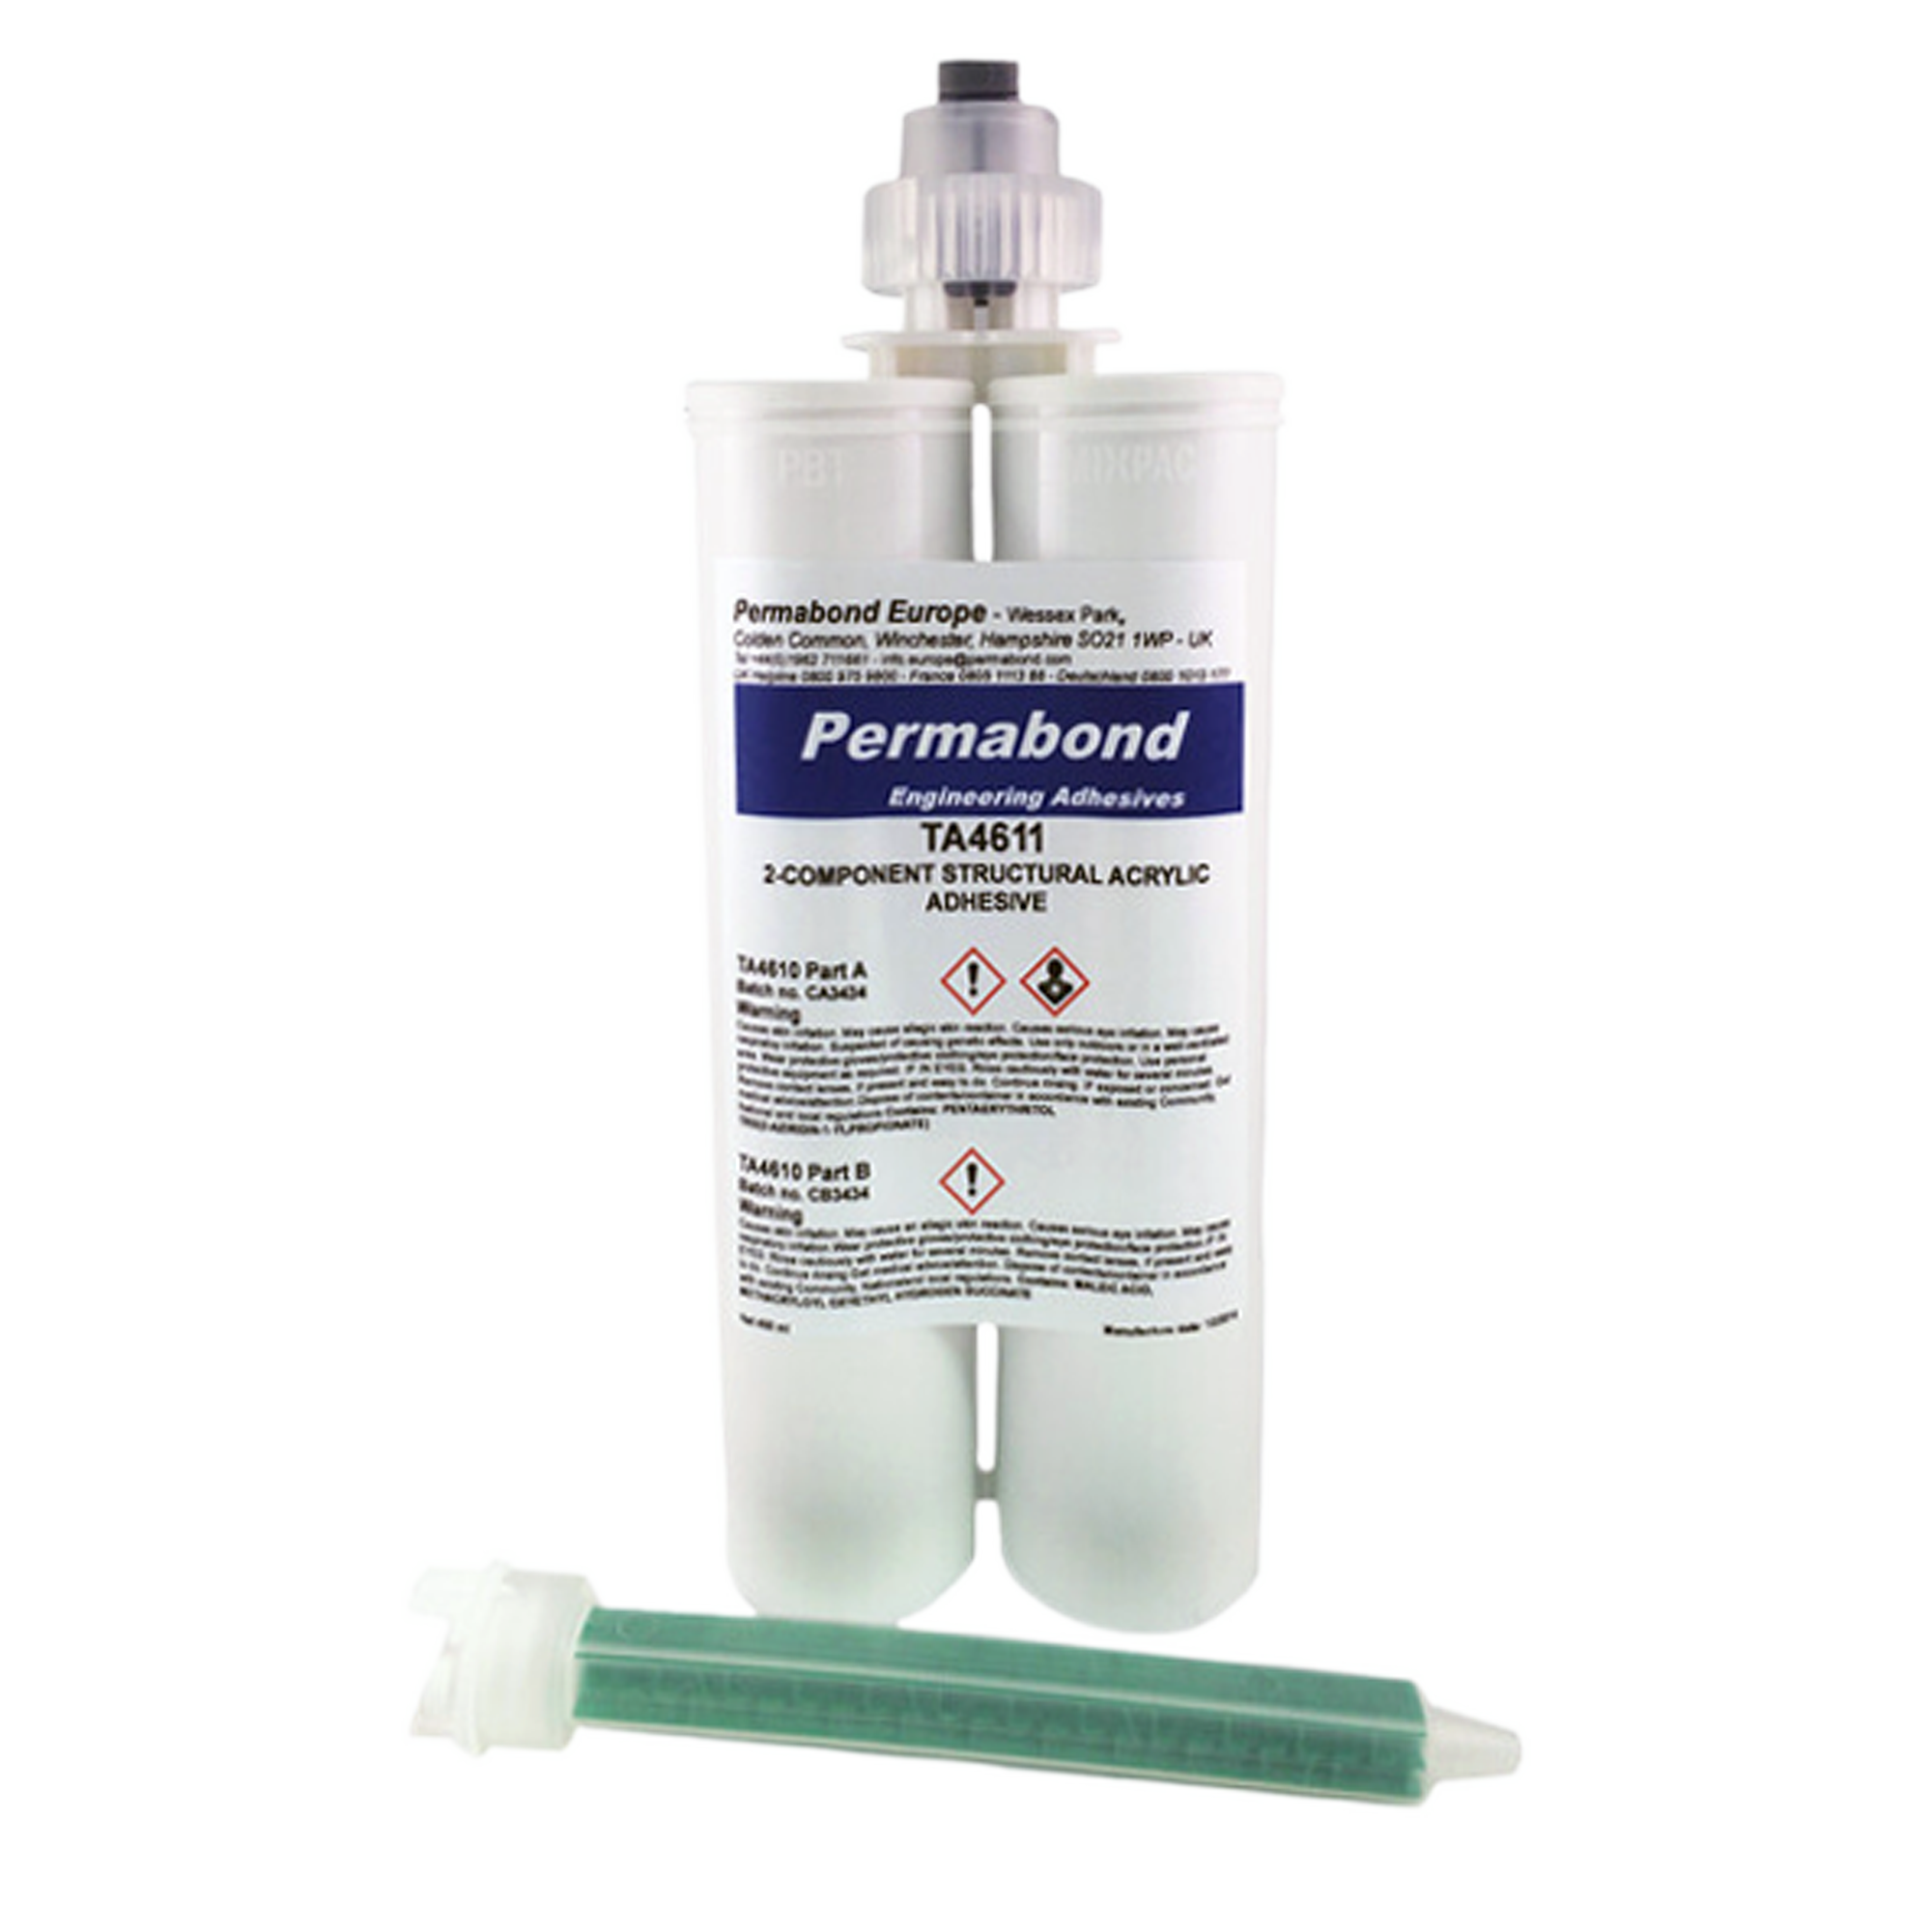 A 2-part, 1:1 toughened acrylic adhesive that bonds and seals conduit connections